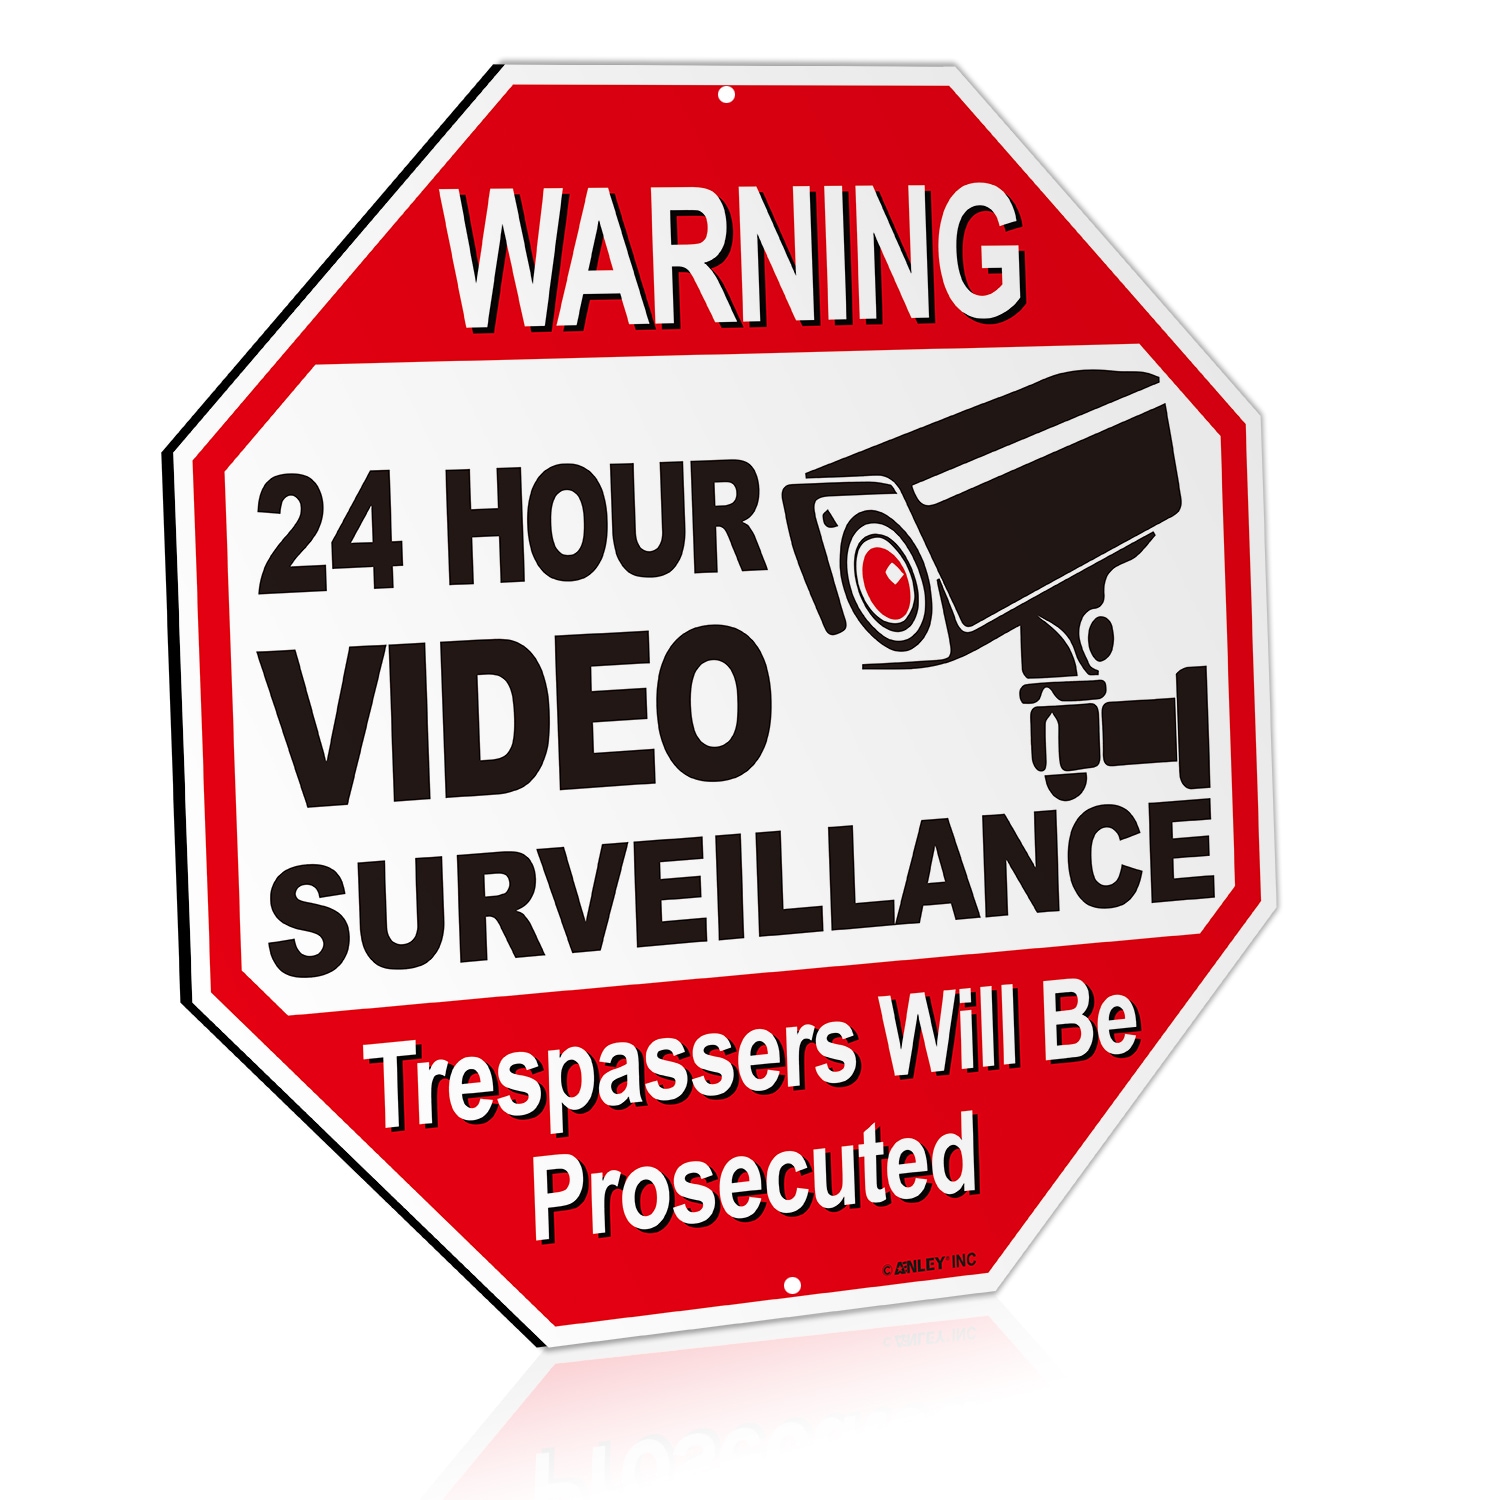 METAL SECURITY SYSTEM VIDEO SURVEILLANCE CAMERAS WARNING YARD SIGN+STICKERS LOT 